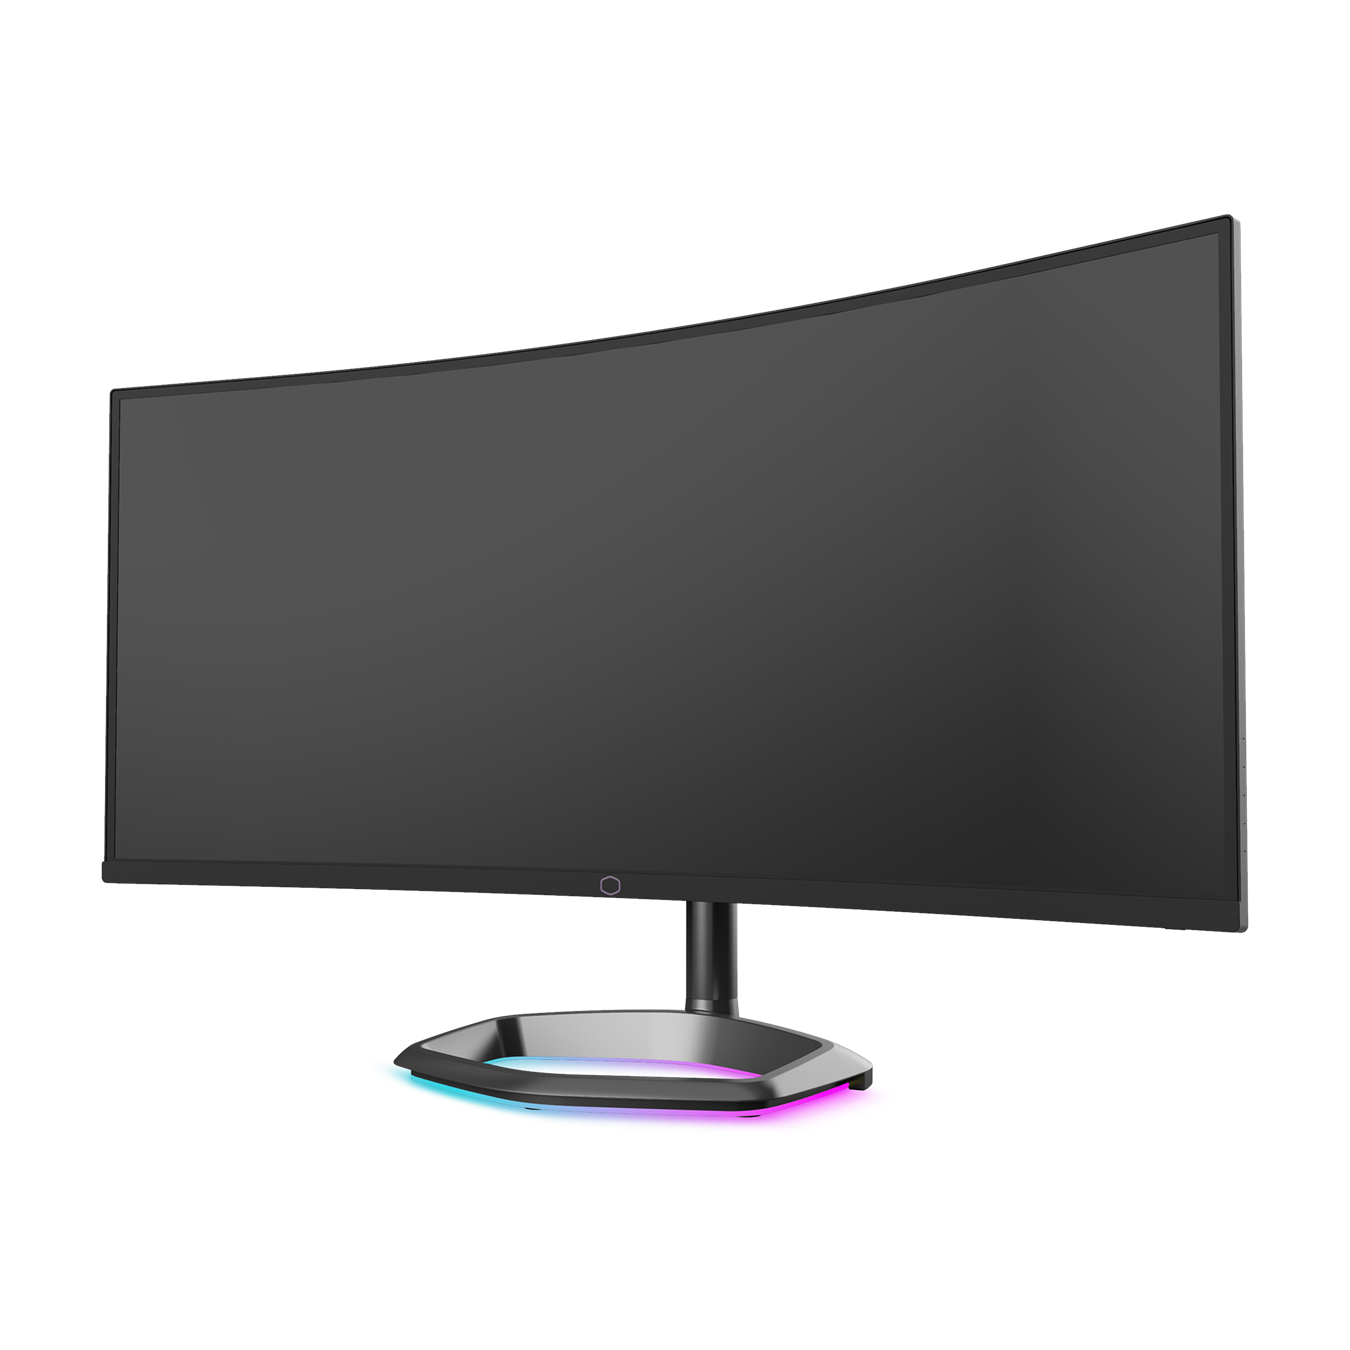 GM34-CWQ ARGB 34" Curved Gaming Monitor - By having up to 144 Hz ultra high refresh rate, 0.5 ms MPRT response time, winning is within your reach whilst working or movie sessions will have less motion blur and smearing.